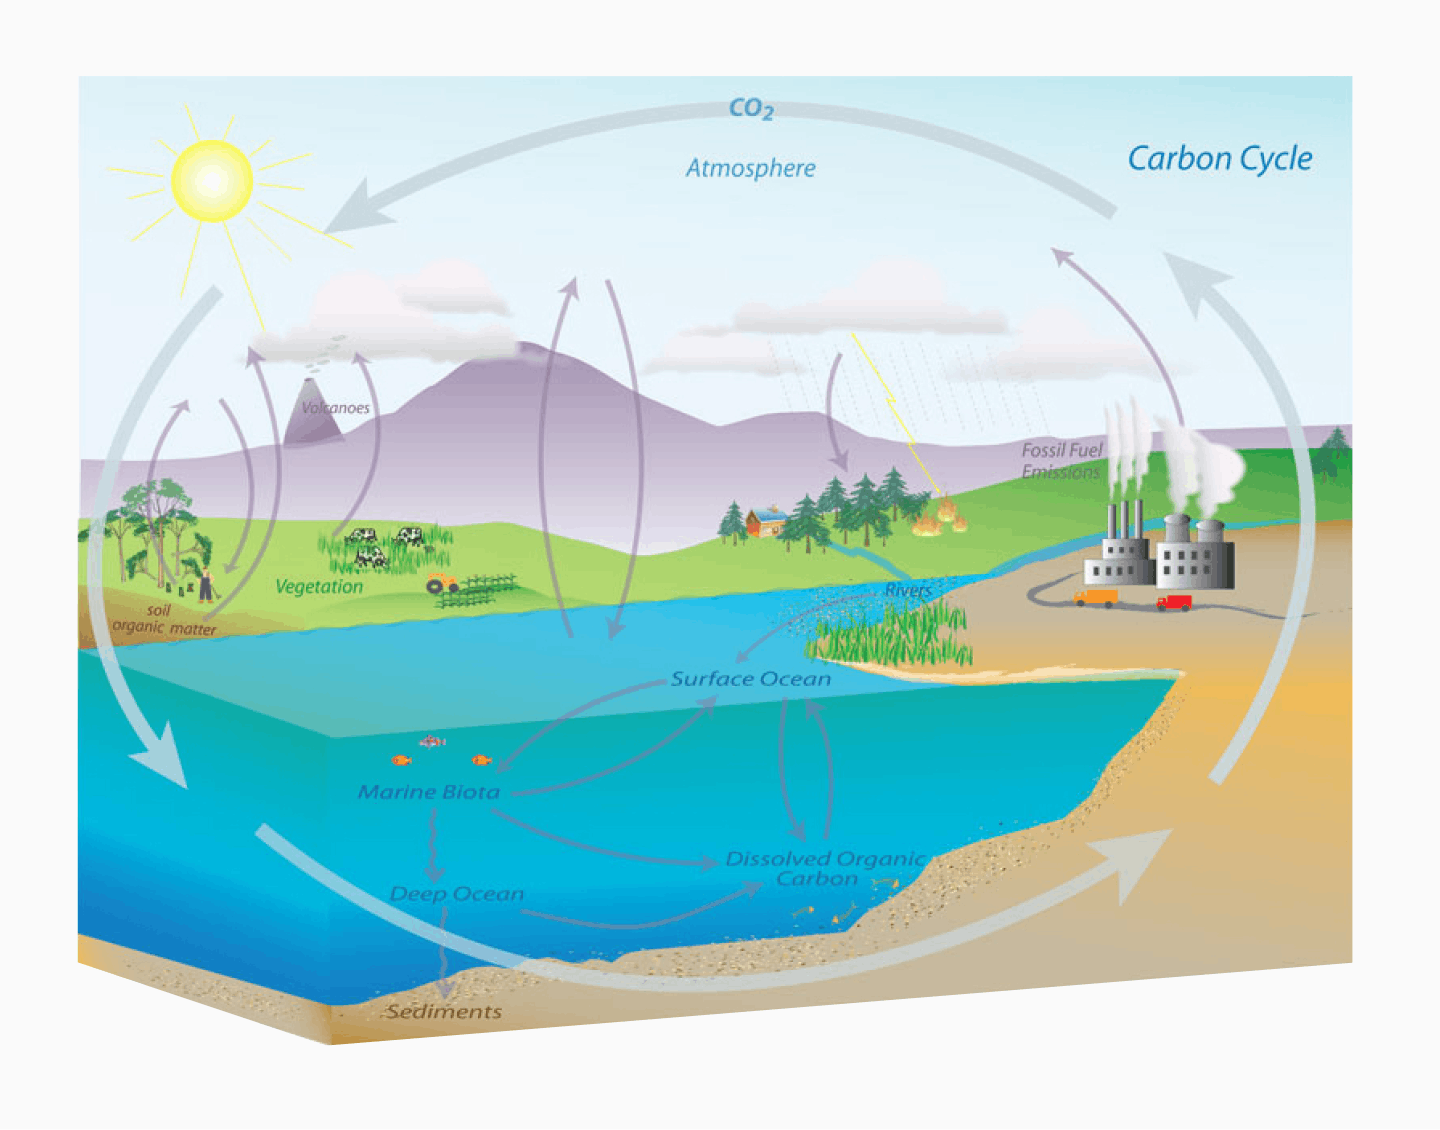 The carbon cycle